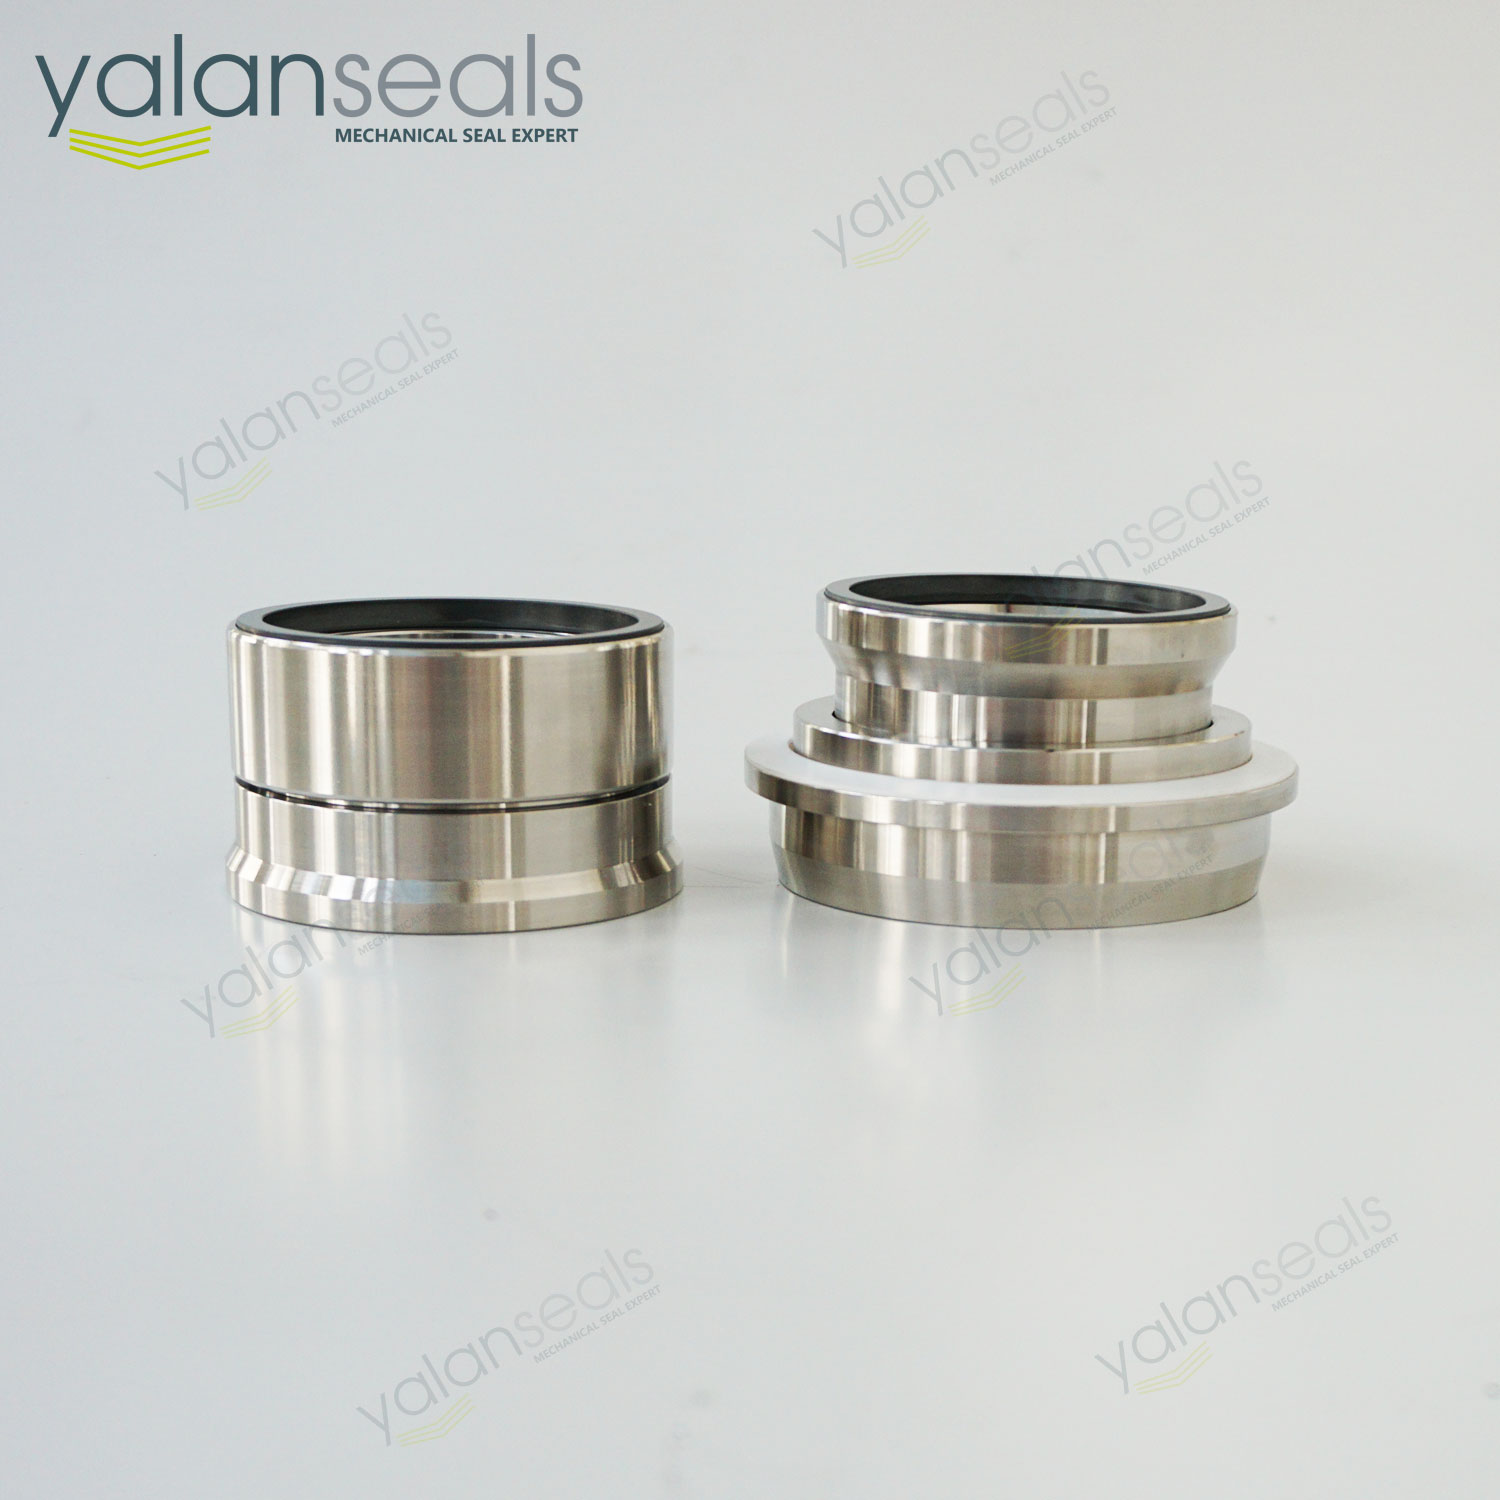 YALAN TB1F Replacement Mechanical Seals for Sulzer Pulp Pumps